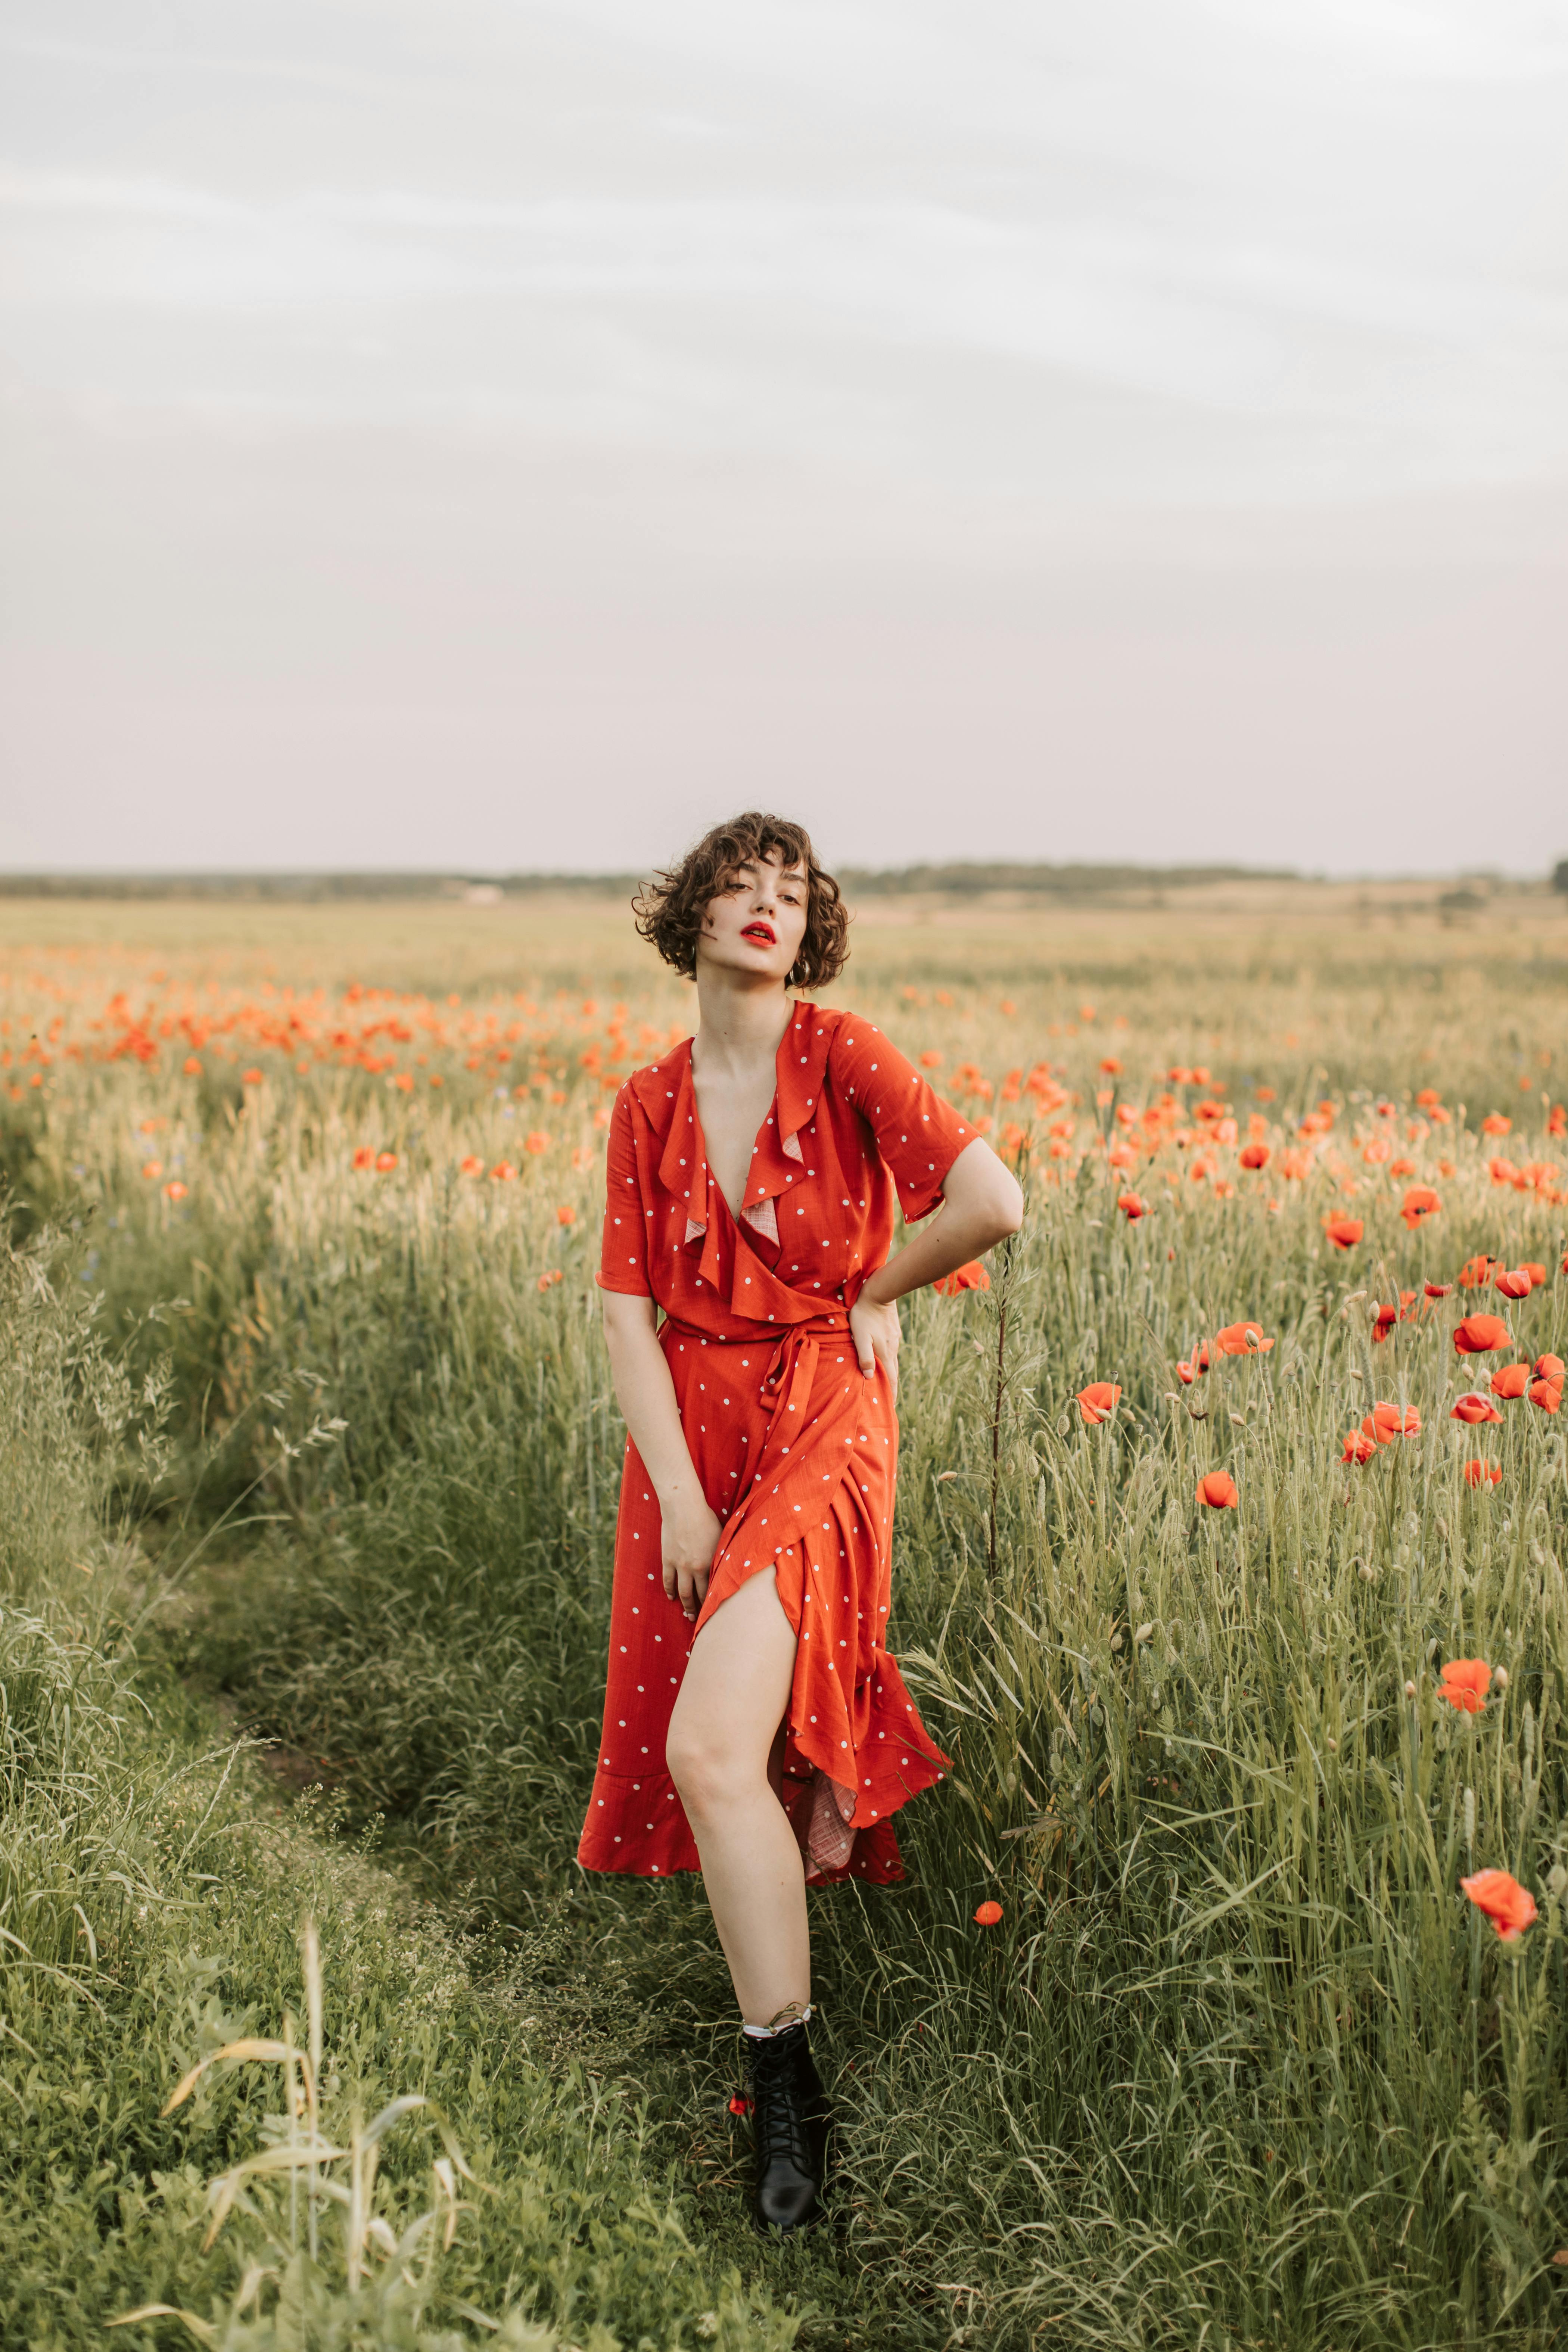 POPPY FIELD | WOMAN IN RED 140 Photos & Videos Collected by Vlada Karpovich